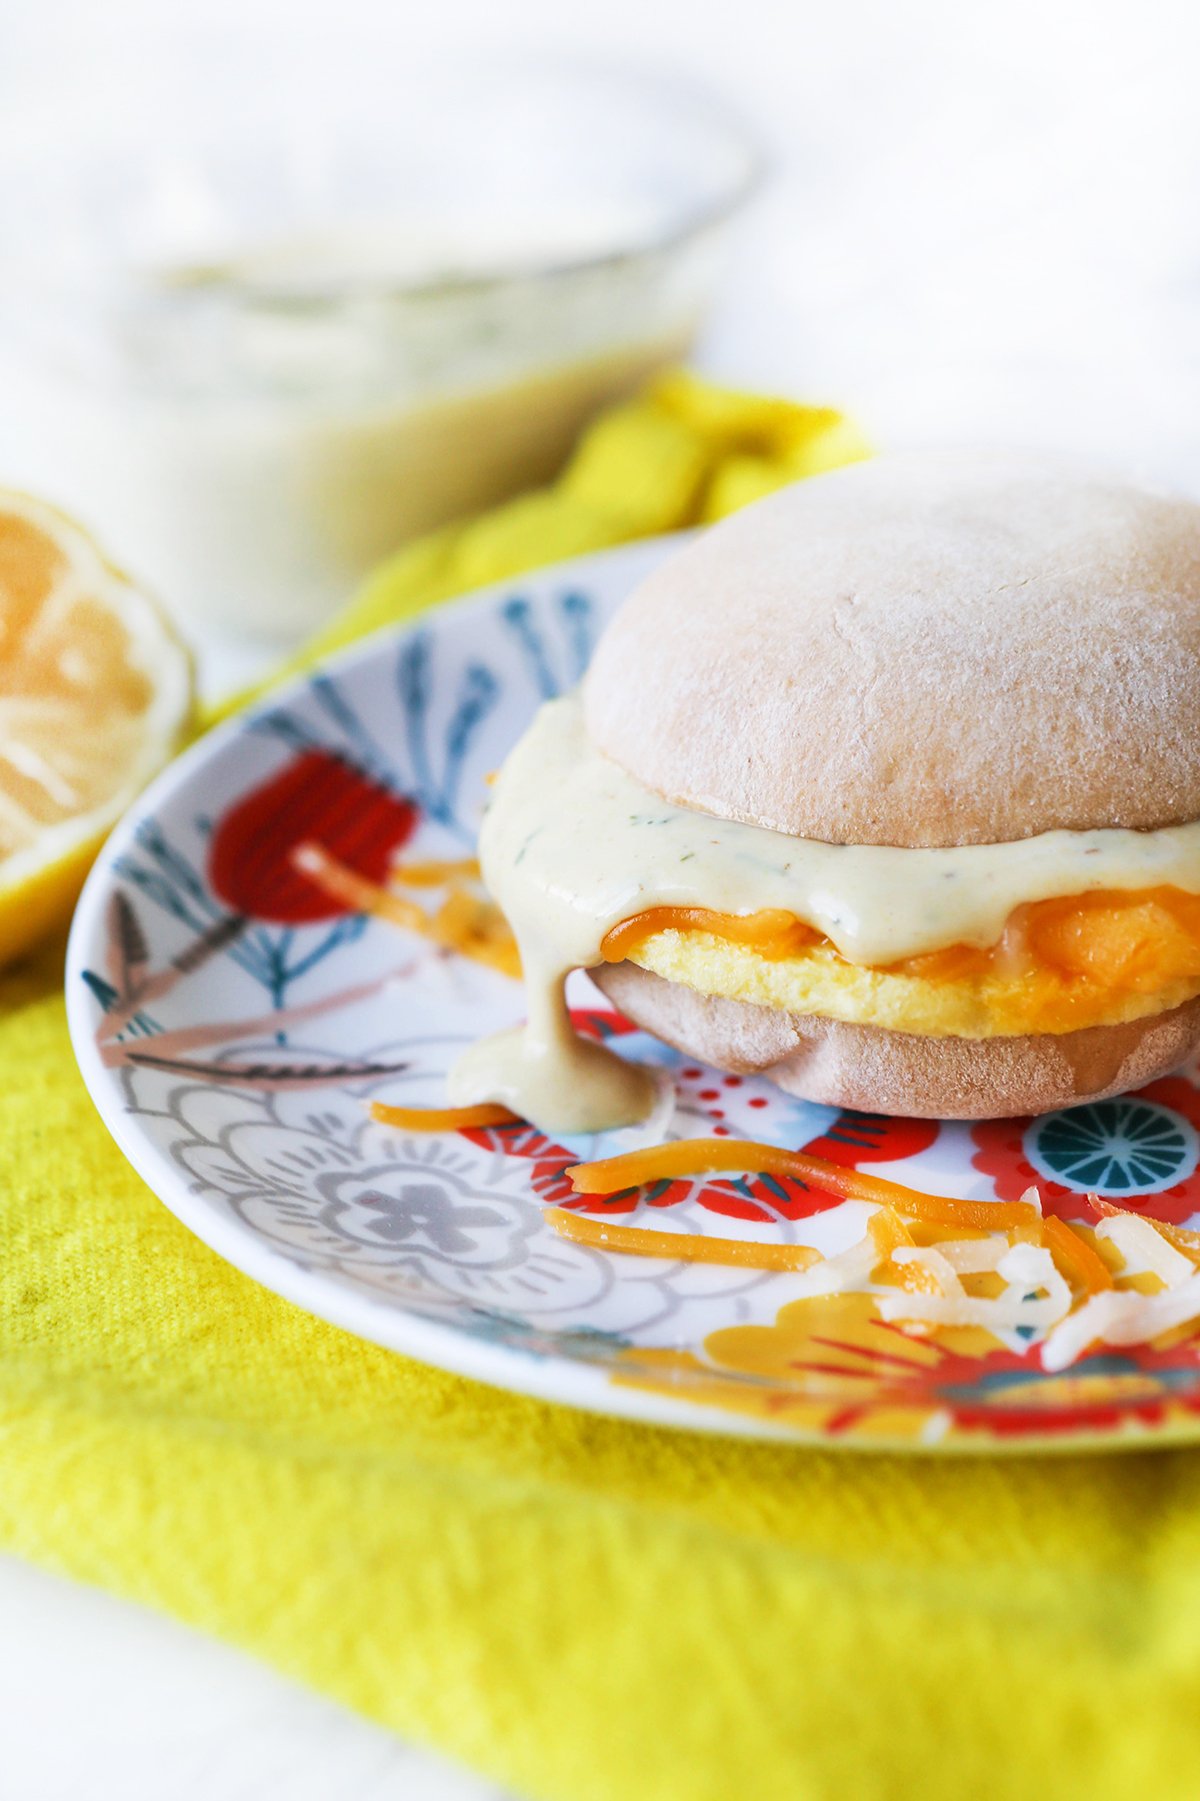 Breakfast sandwich on a colorful plate with a sauce oozing out the sides.